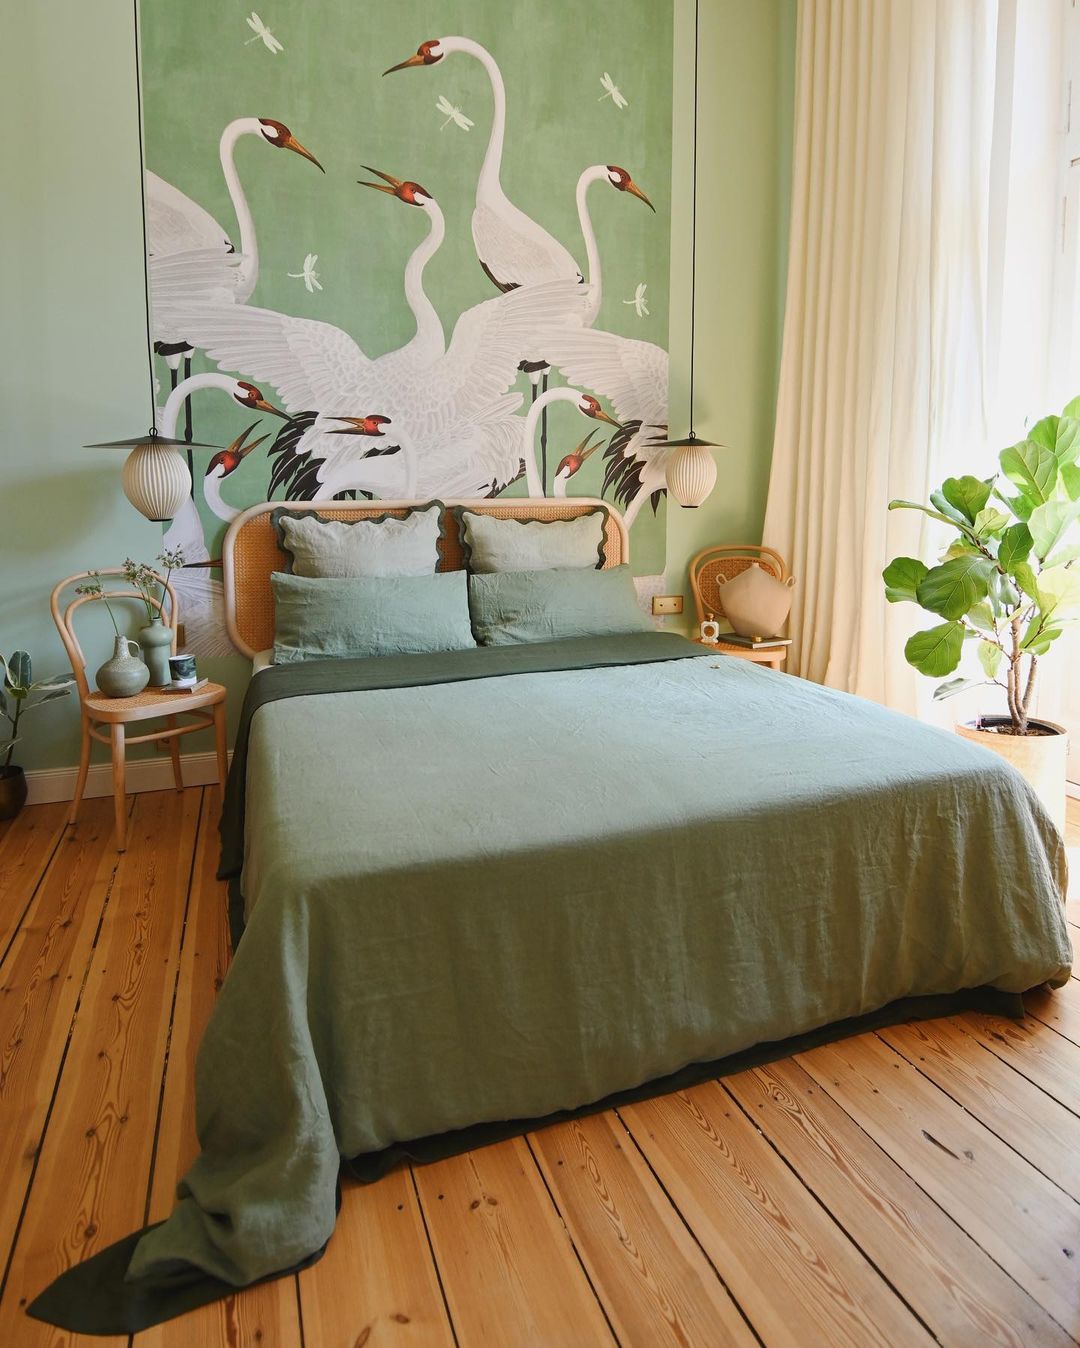 a few eclectic furnishings can bring charm and add character to a green-themed bedroom 